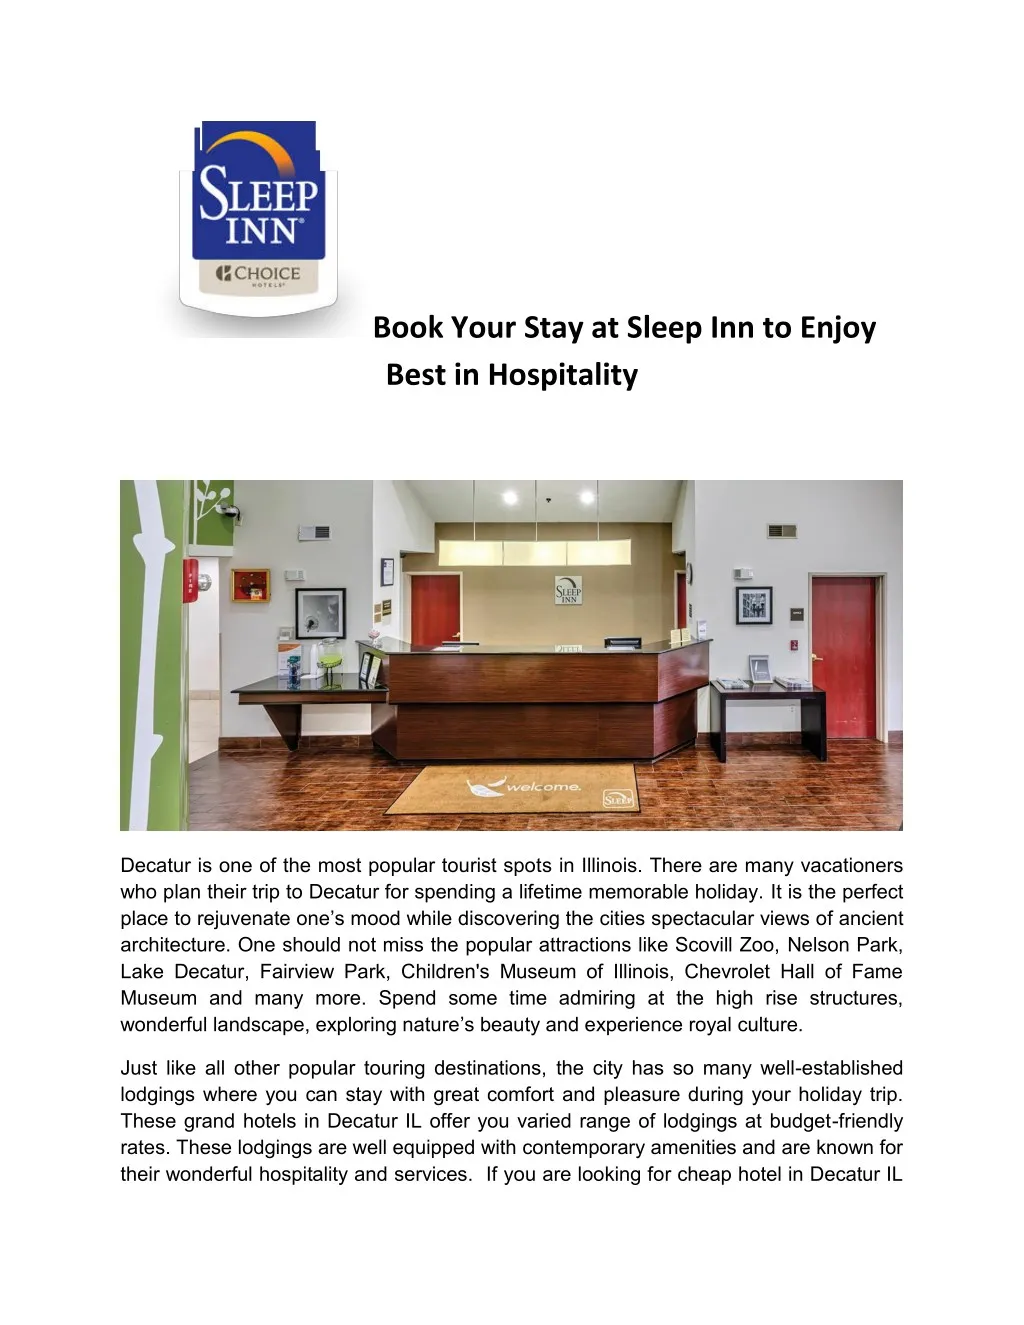 book your stay at sleep inn to enjoy best